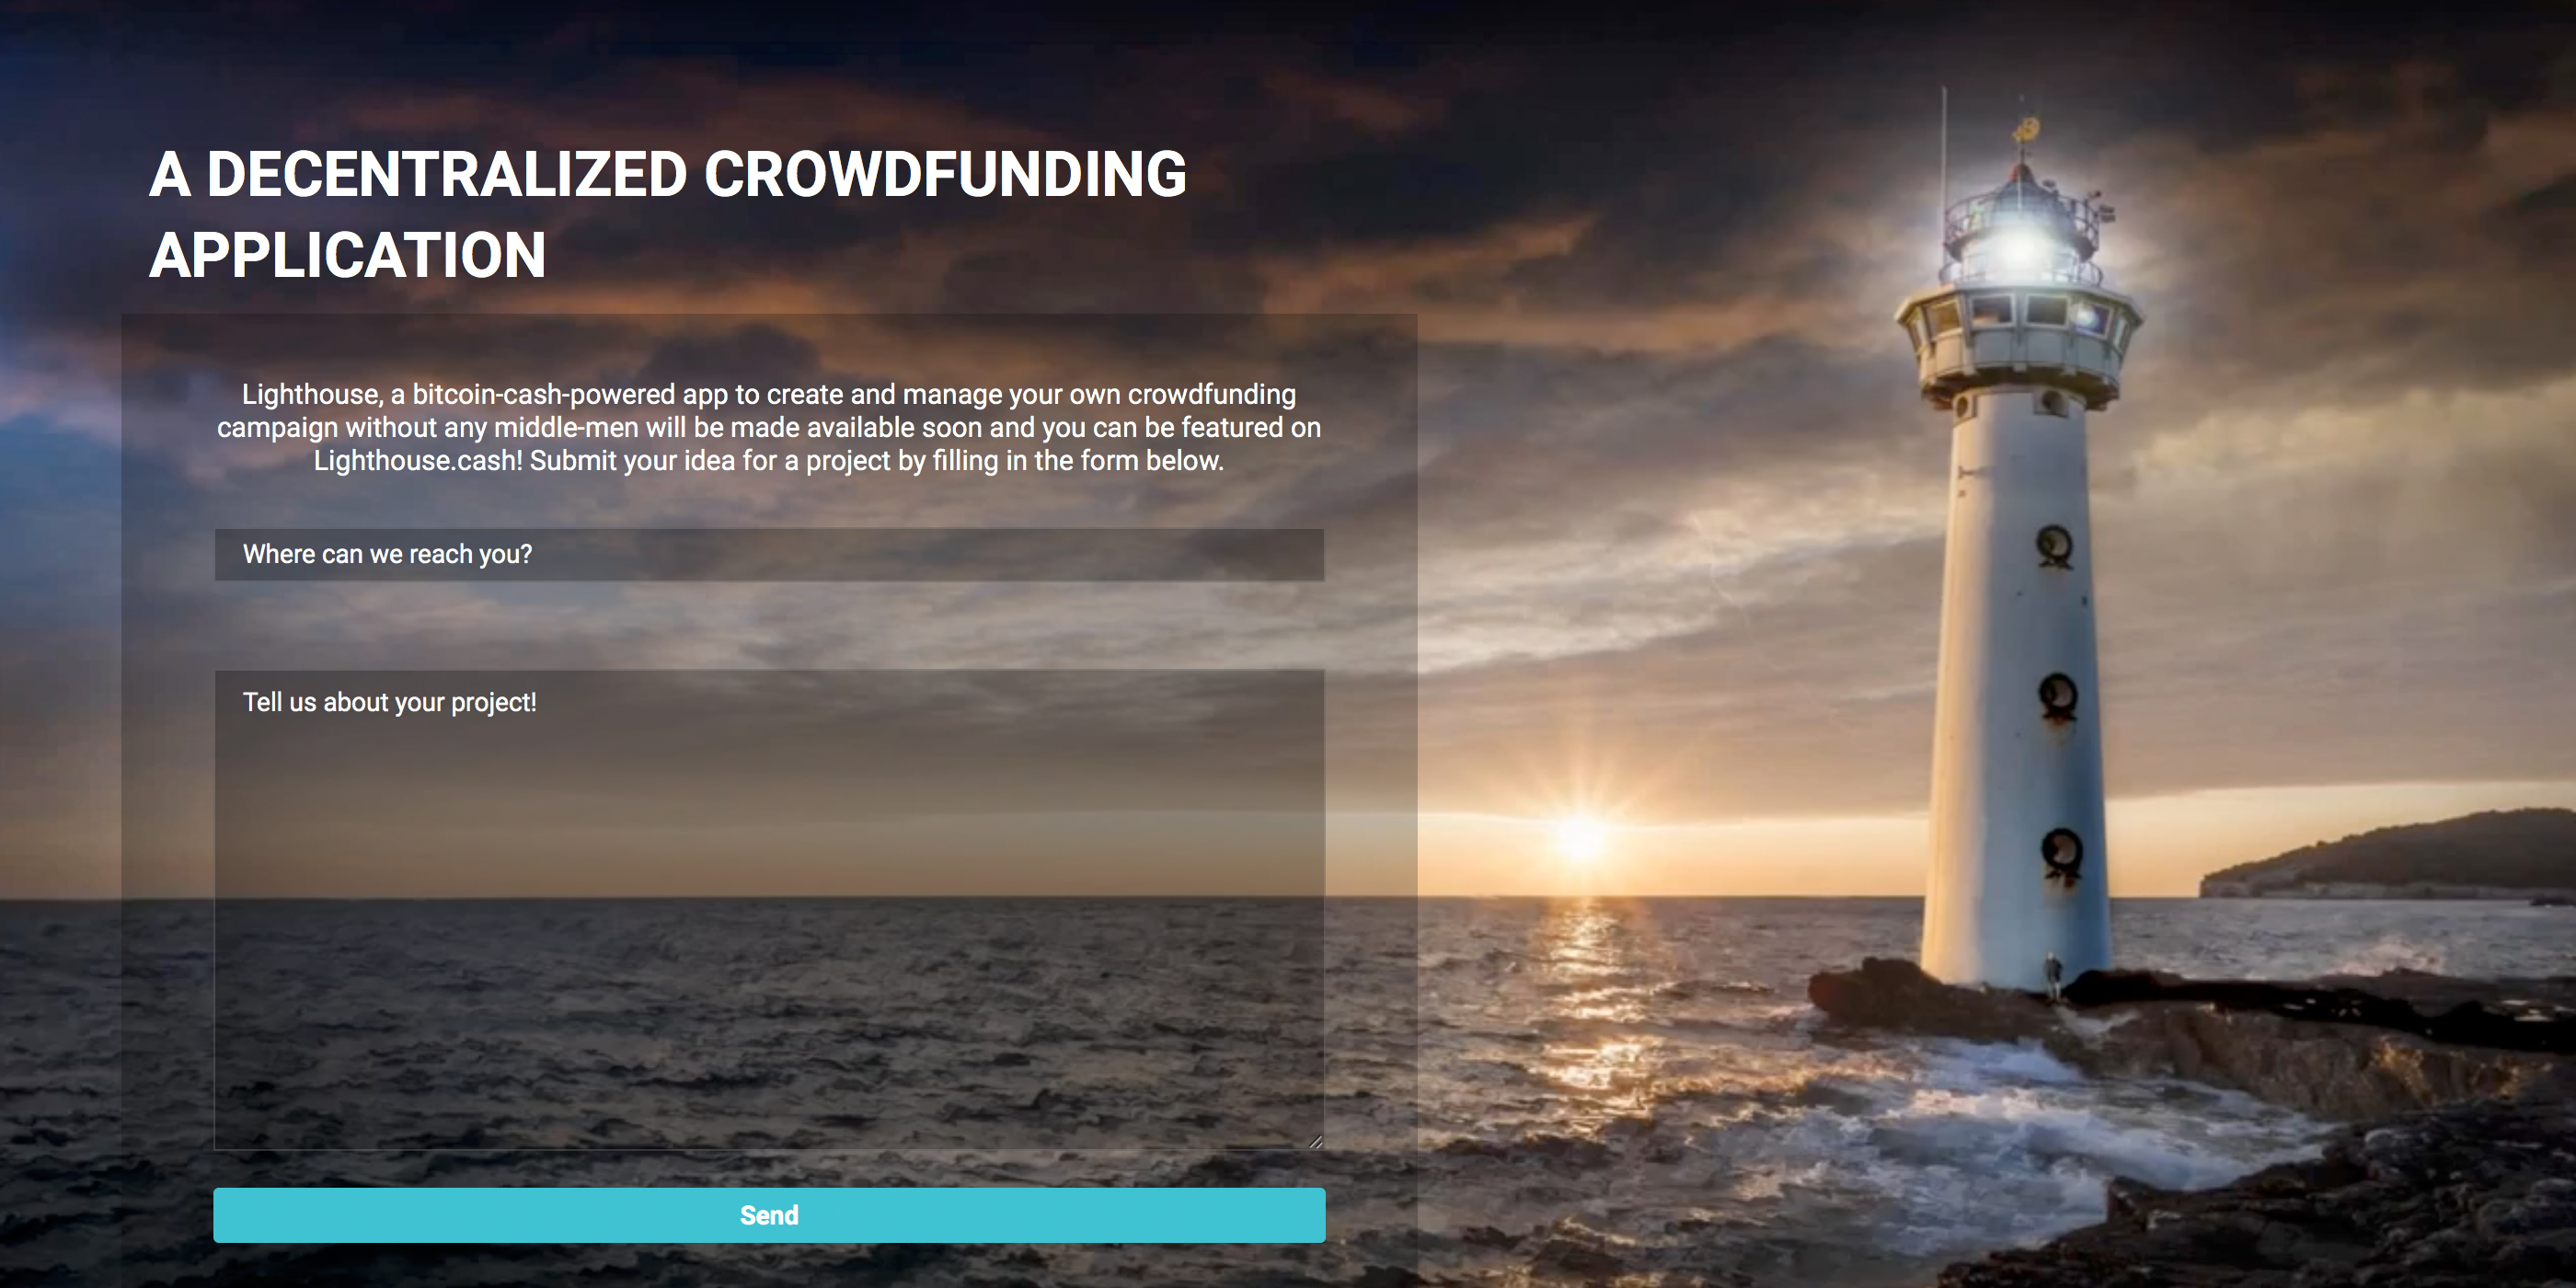 Mike Hearn's Crowdfunding Project Has Been Resurrected — Meet Lighthouse.cash